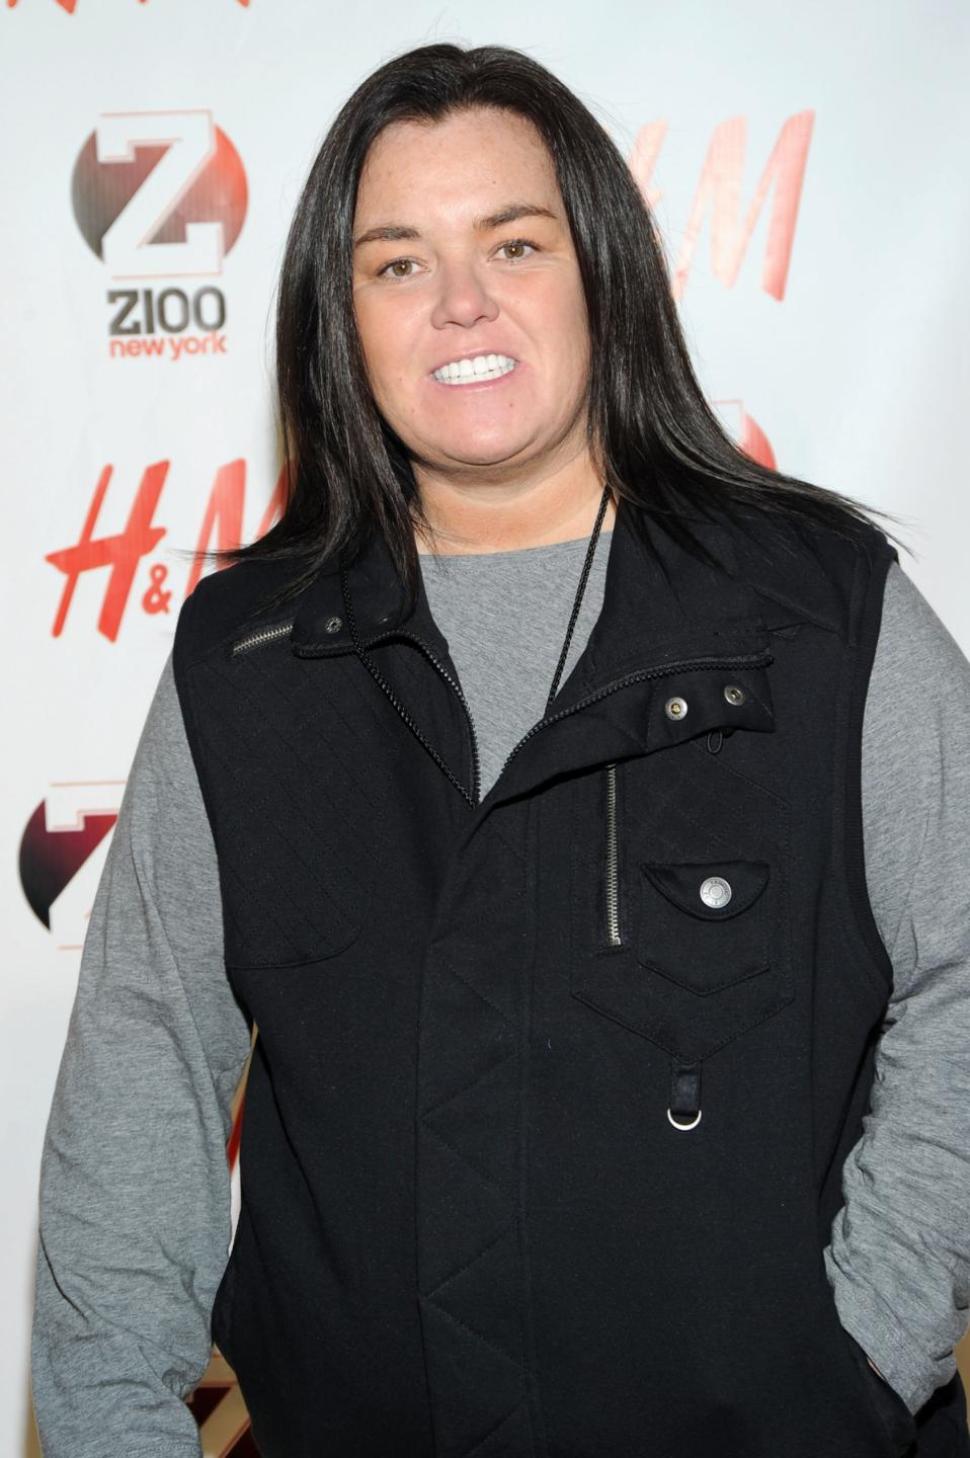 Rosie O’Donnell (above) and Kelly Ripa will be sharing a building soon, and one source says it may not be big enough.